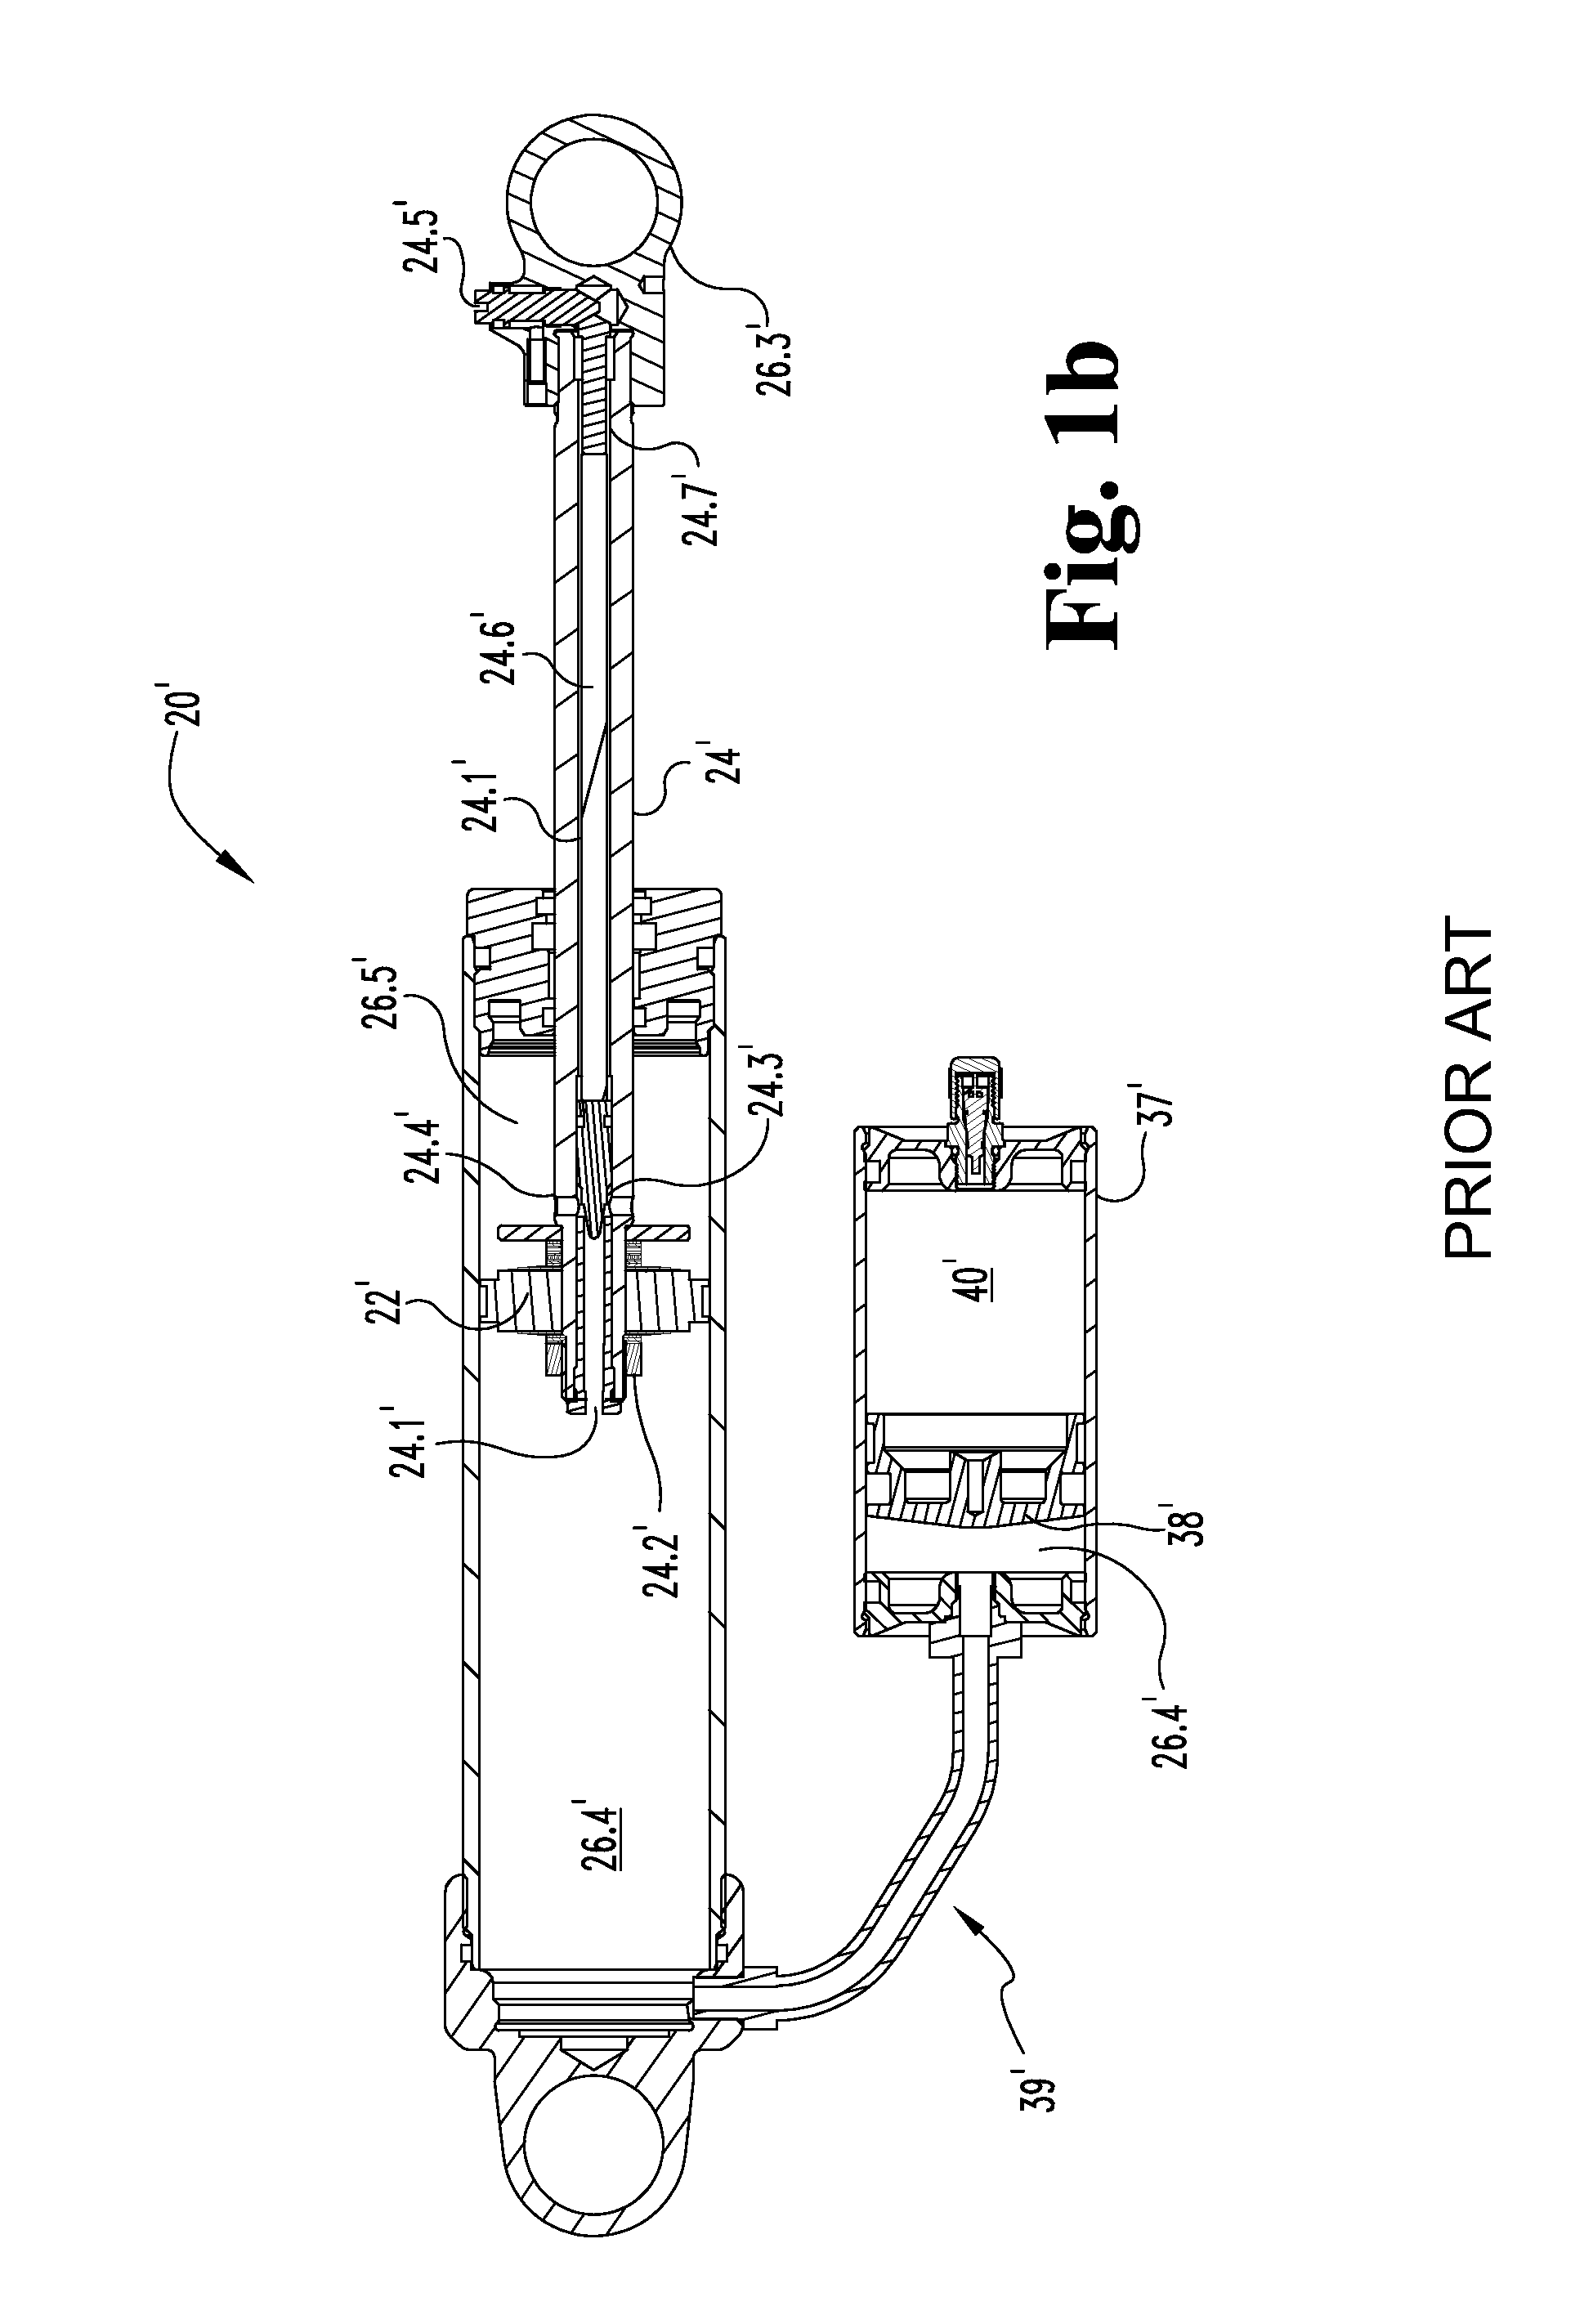 Methods and apparatus for developing a vehicle suspension